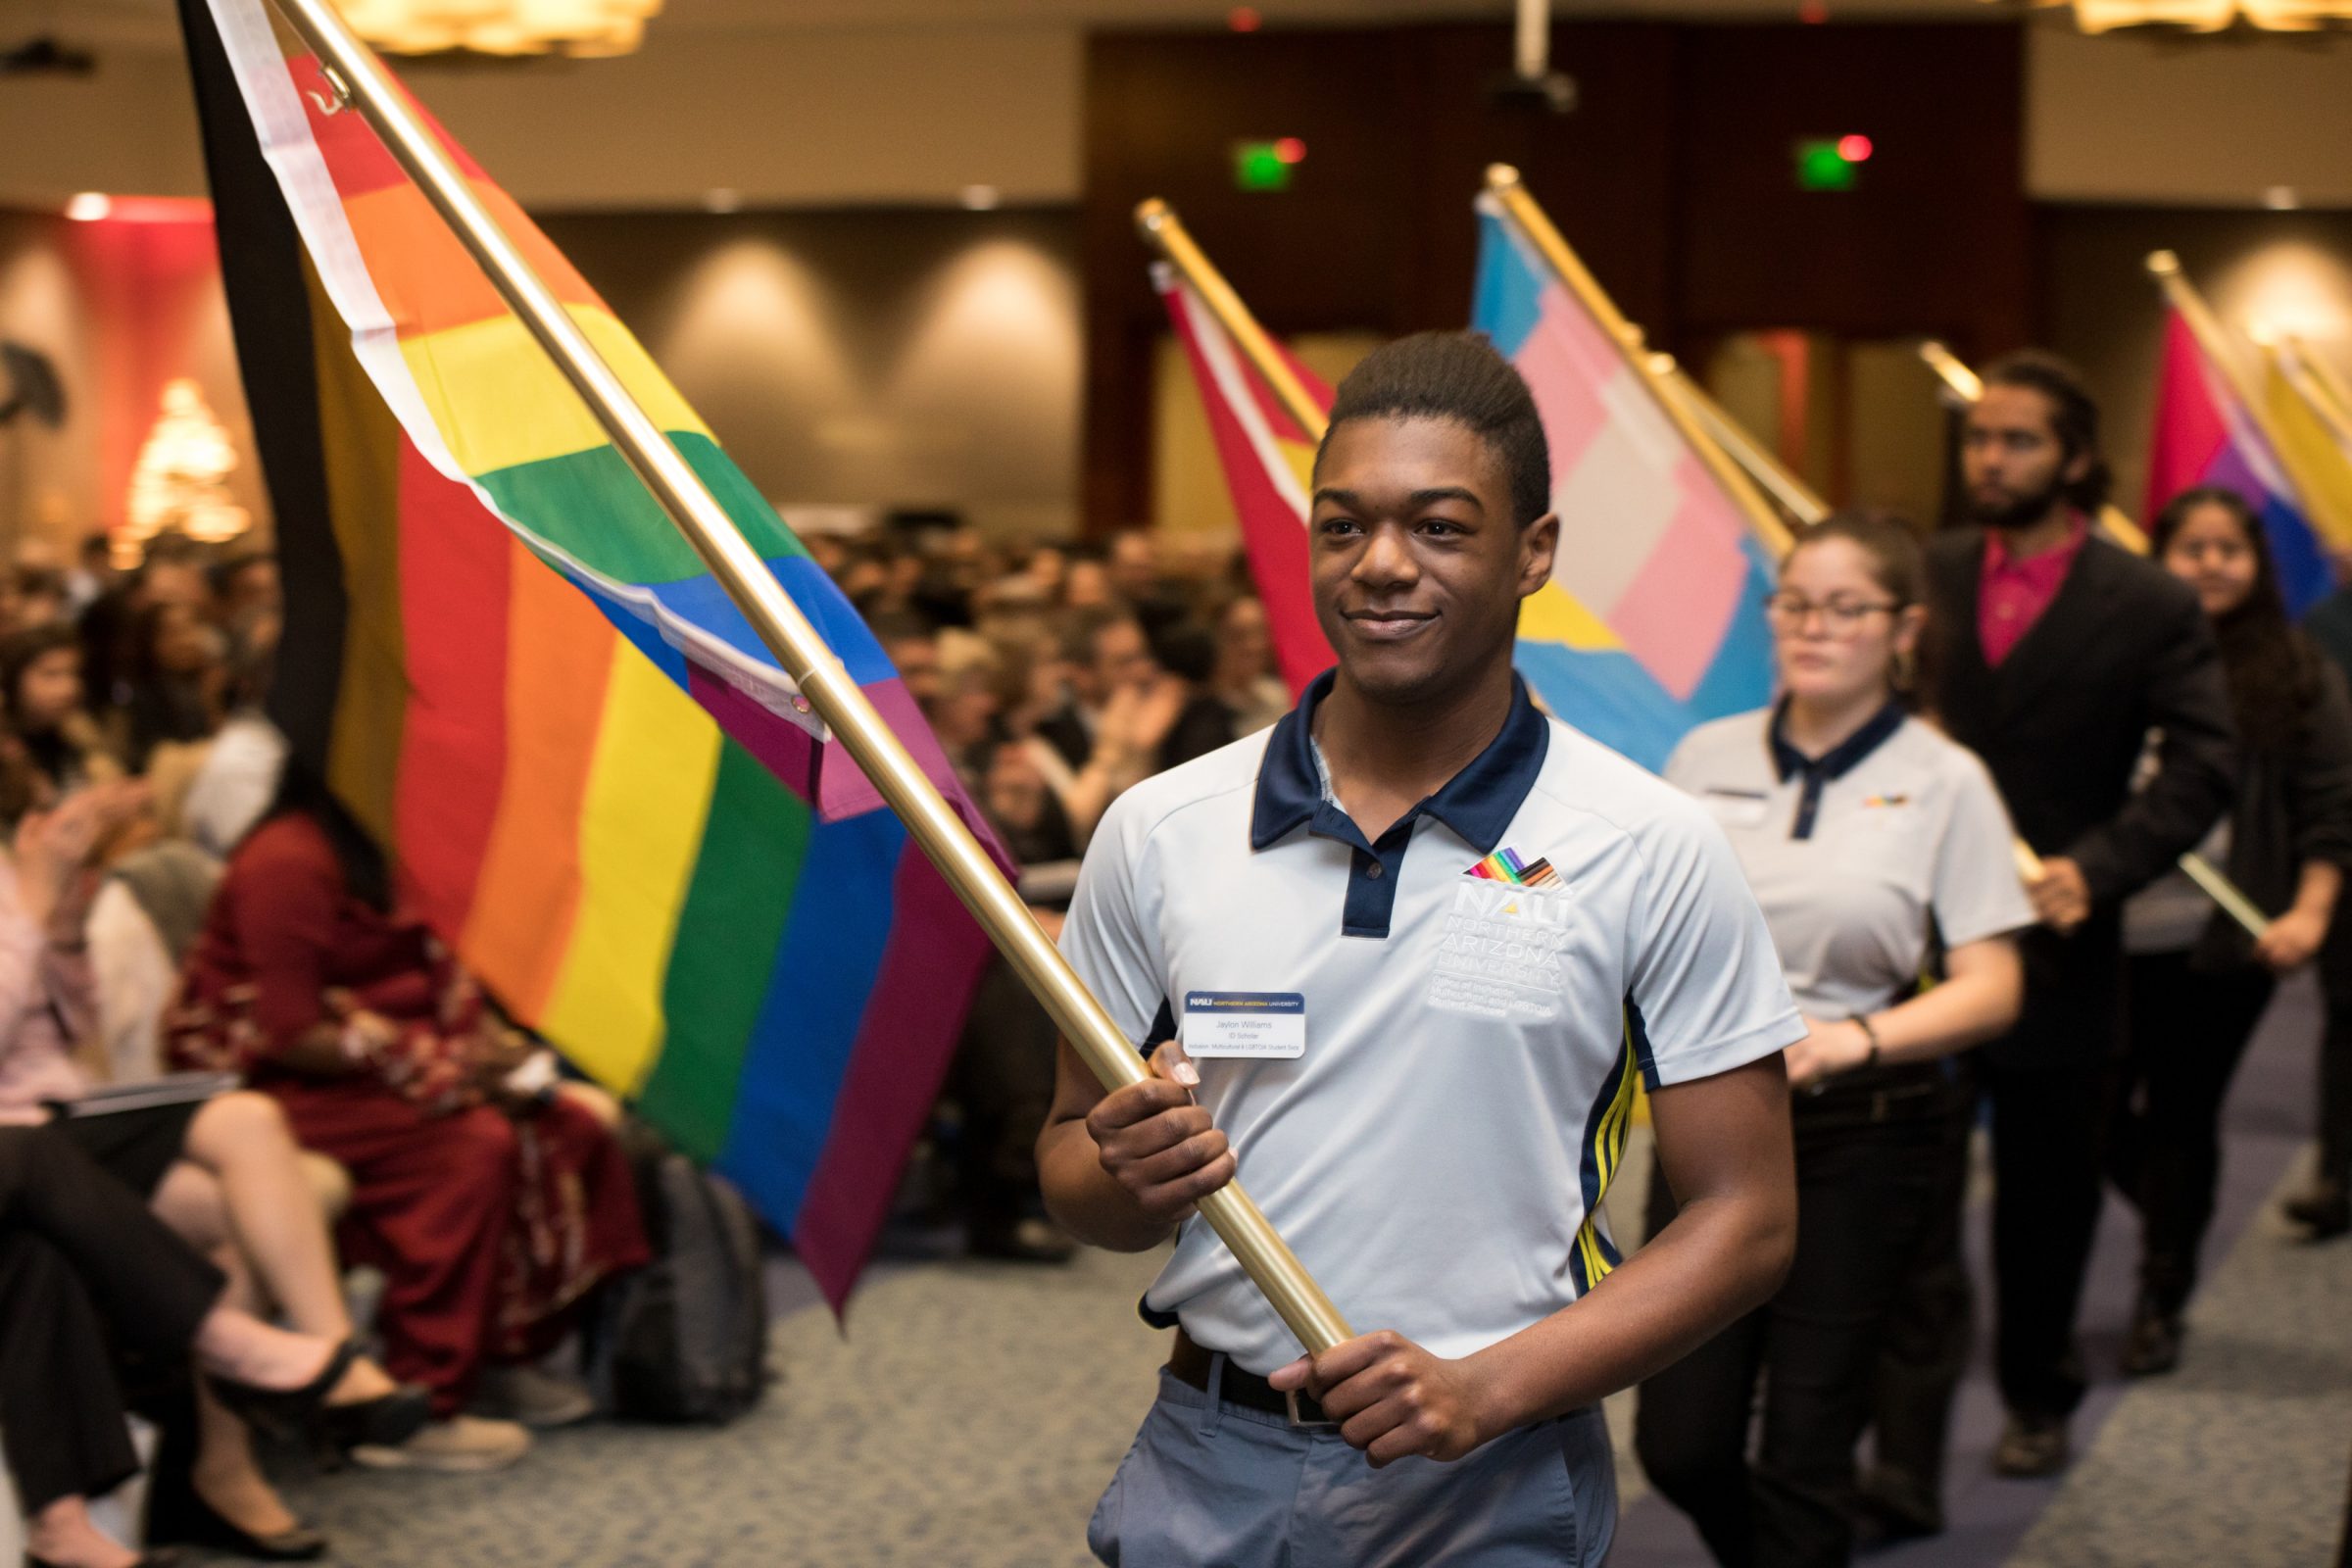 Students lined up with different symbolic flags at a diversity event.